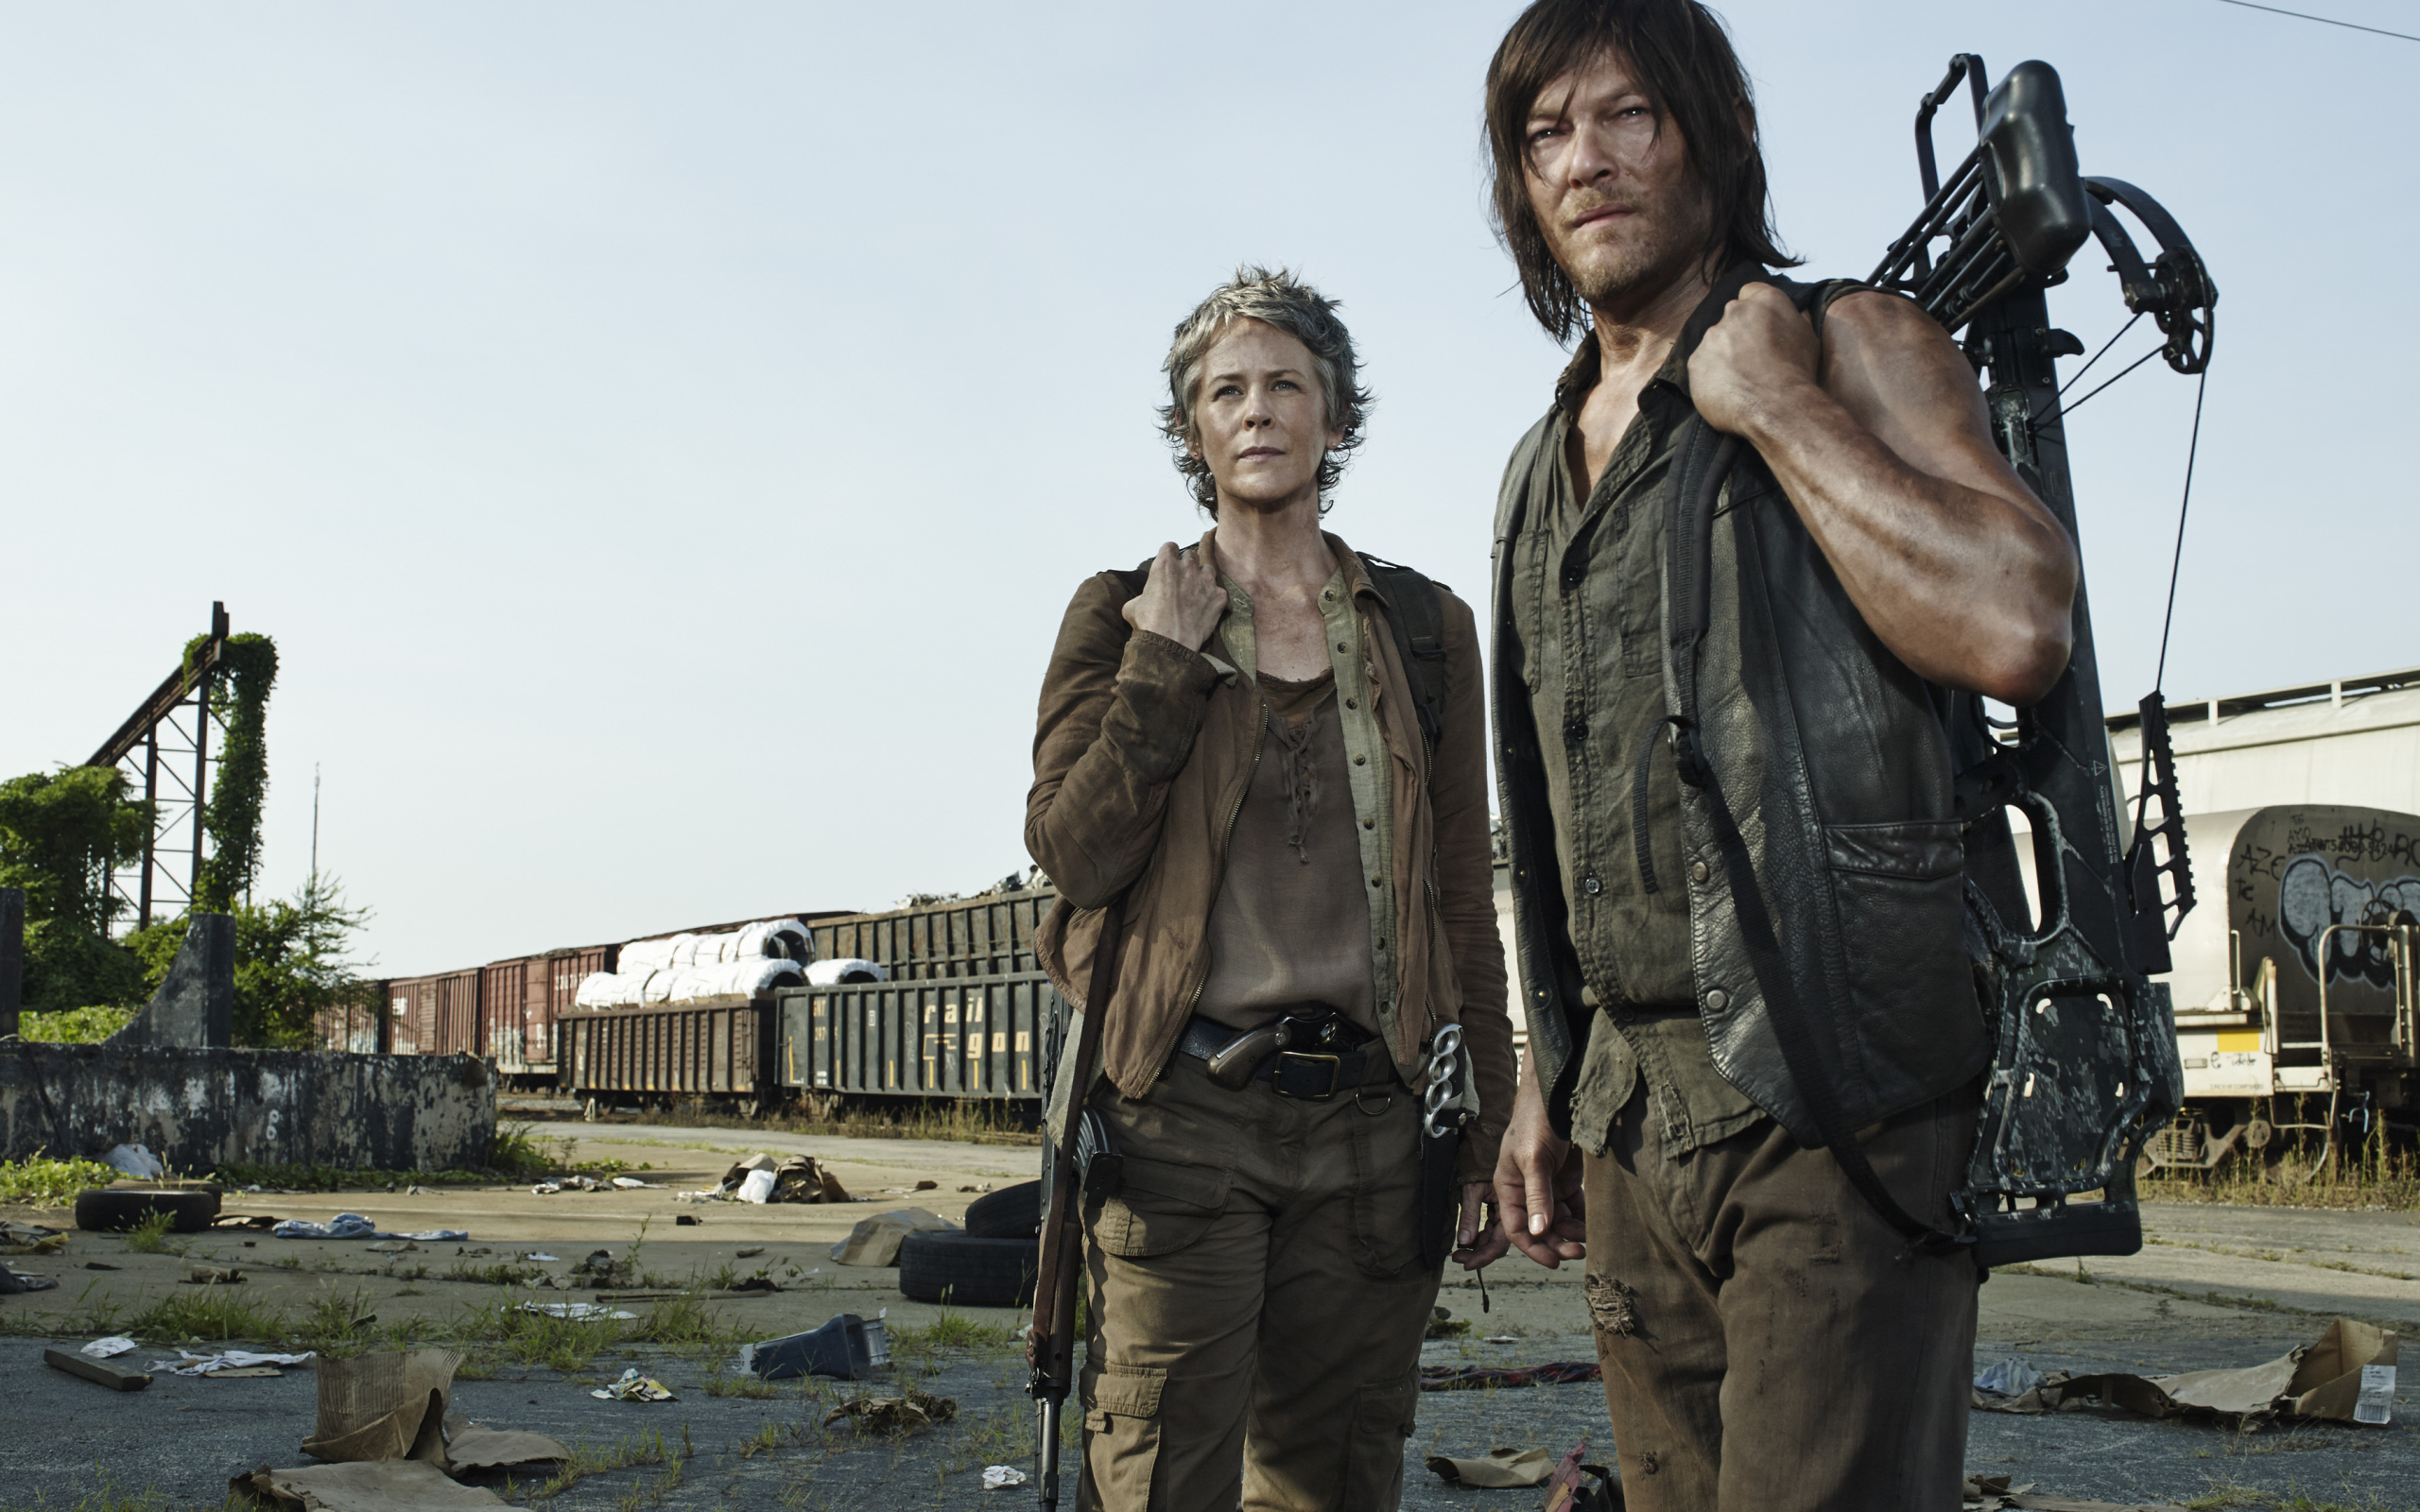 Carol and Daryl from The Walking Dead